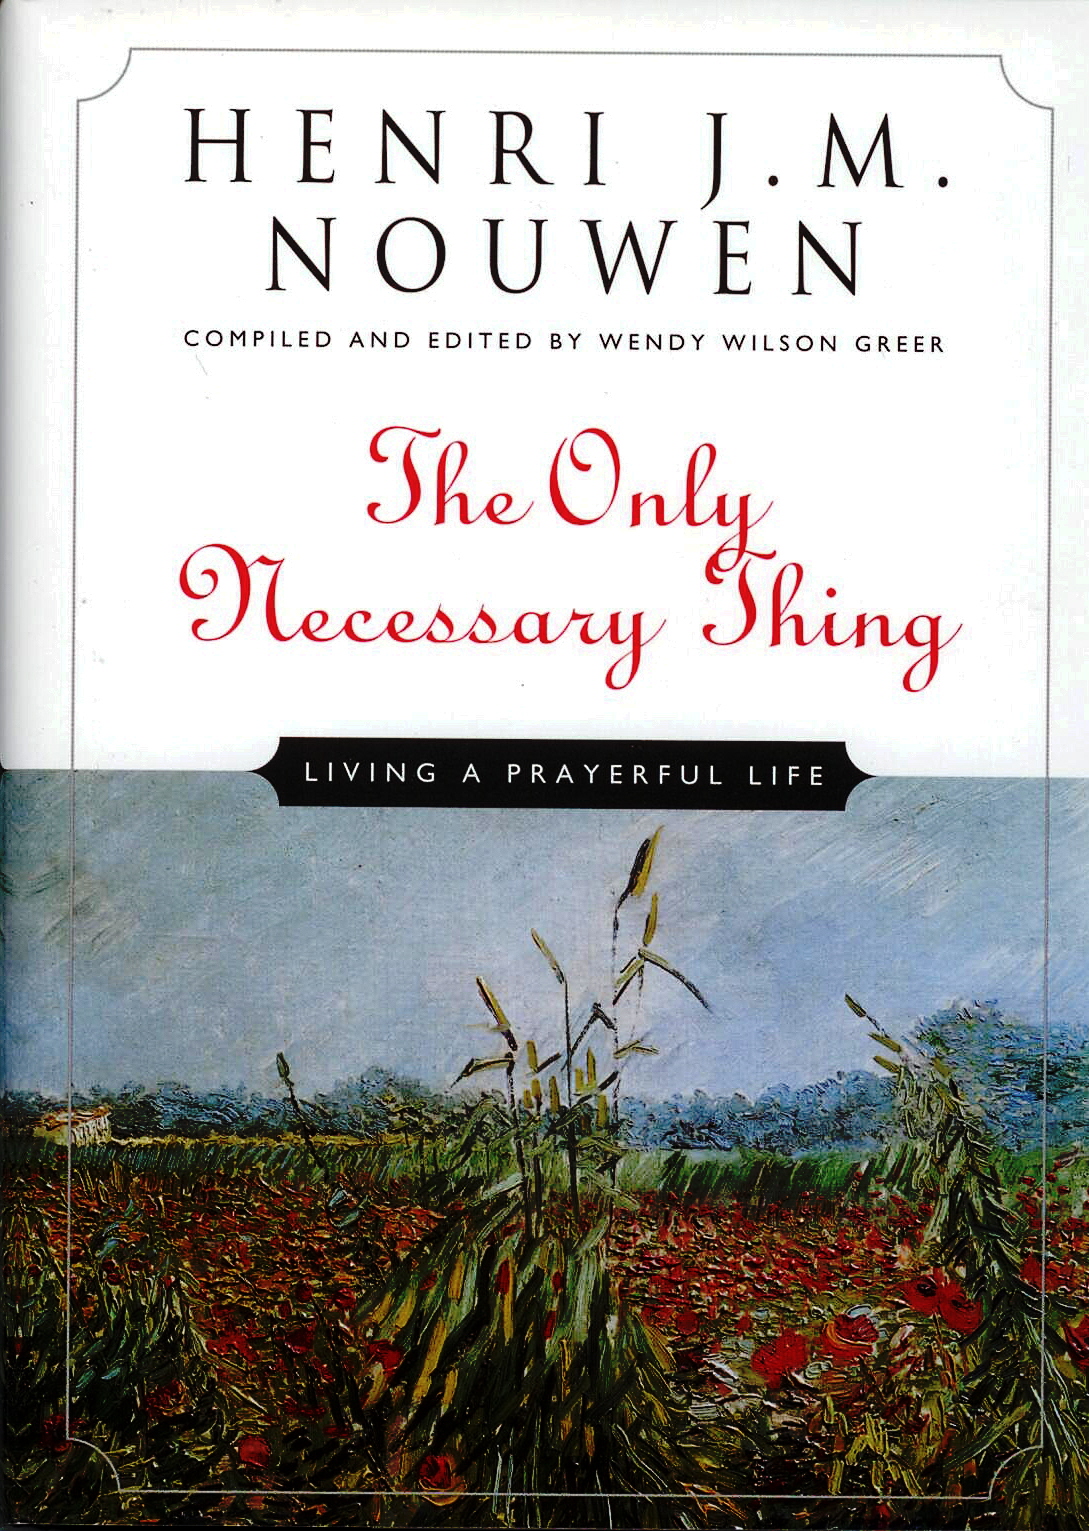 The Only Necessary Thing by Henri J.M. Nouwen